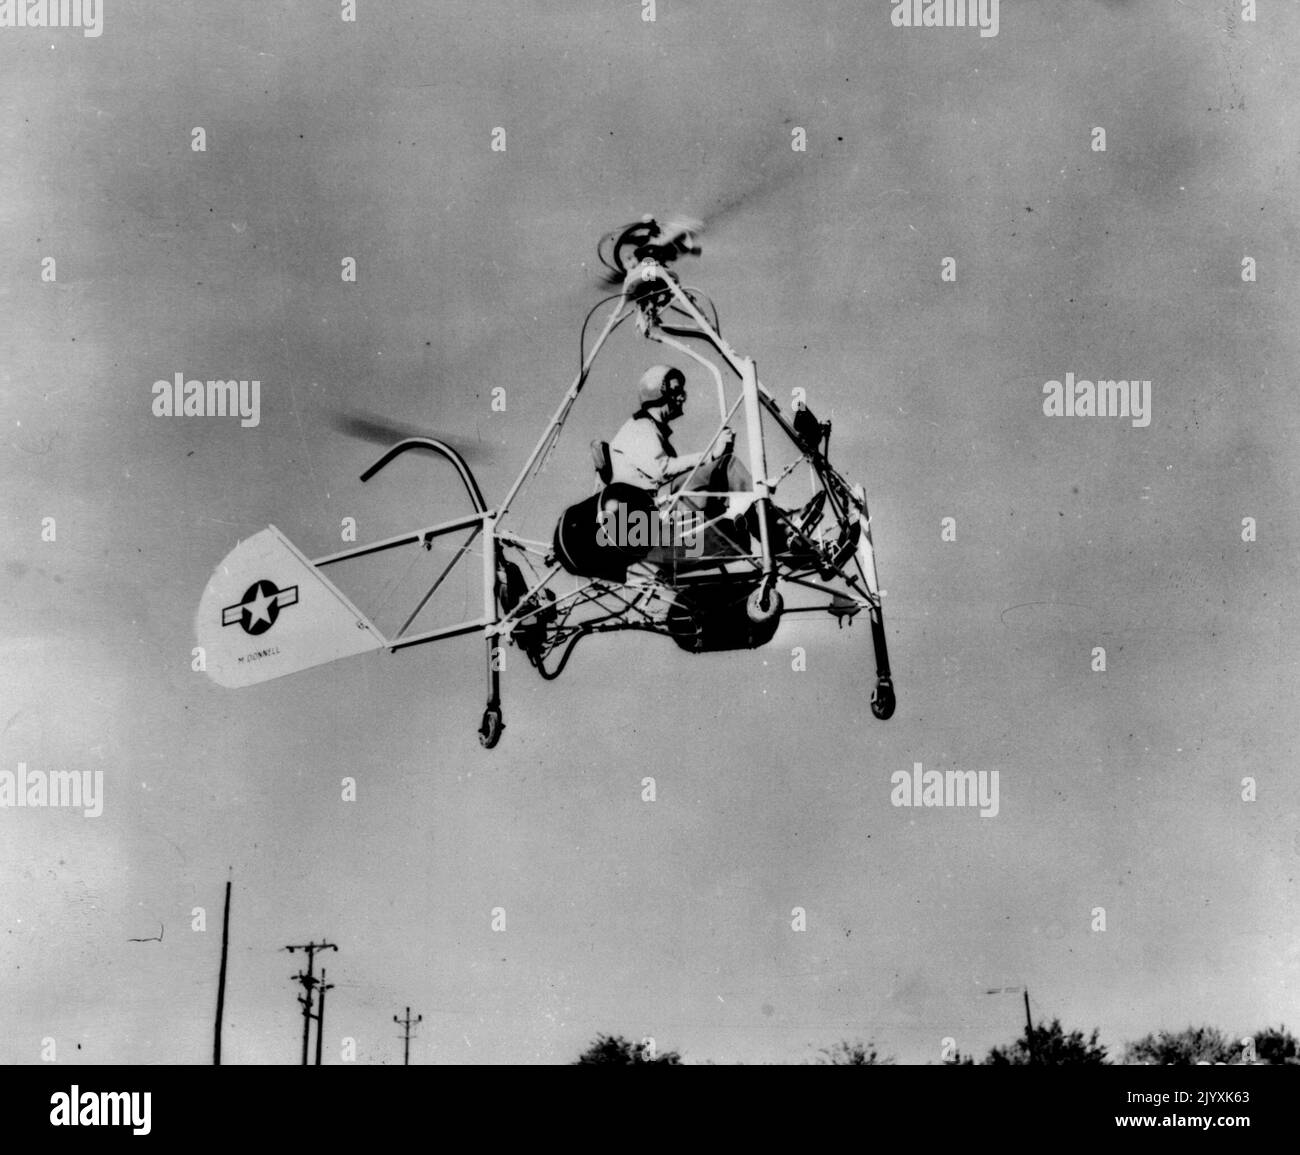 Helicopter Motorcycle In Flight -- The Air Forces' New Helicopter motorcycle, powered by ram jet units to spin the rotor blades, makes a test flight at the St. Louis, Mo., plant of the McDonnel Aircraft corporation. The craft eights only 310 pounds but has lifted an additional load of 300 pounds and moved at a speed of 50 miles an hour. November 15, 1947. (Photo by Associated Press Photo). Stock Photo